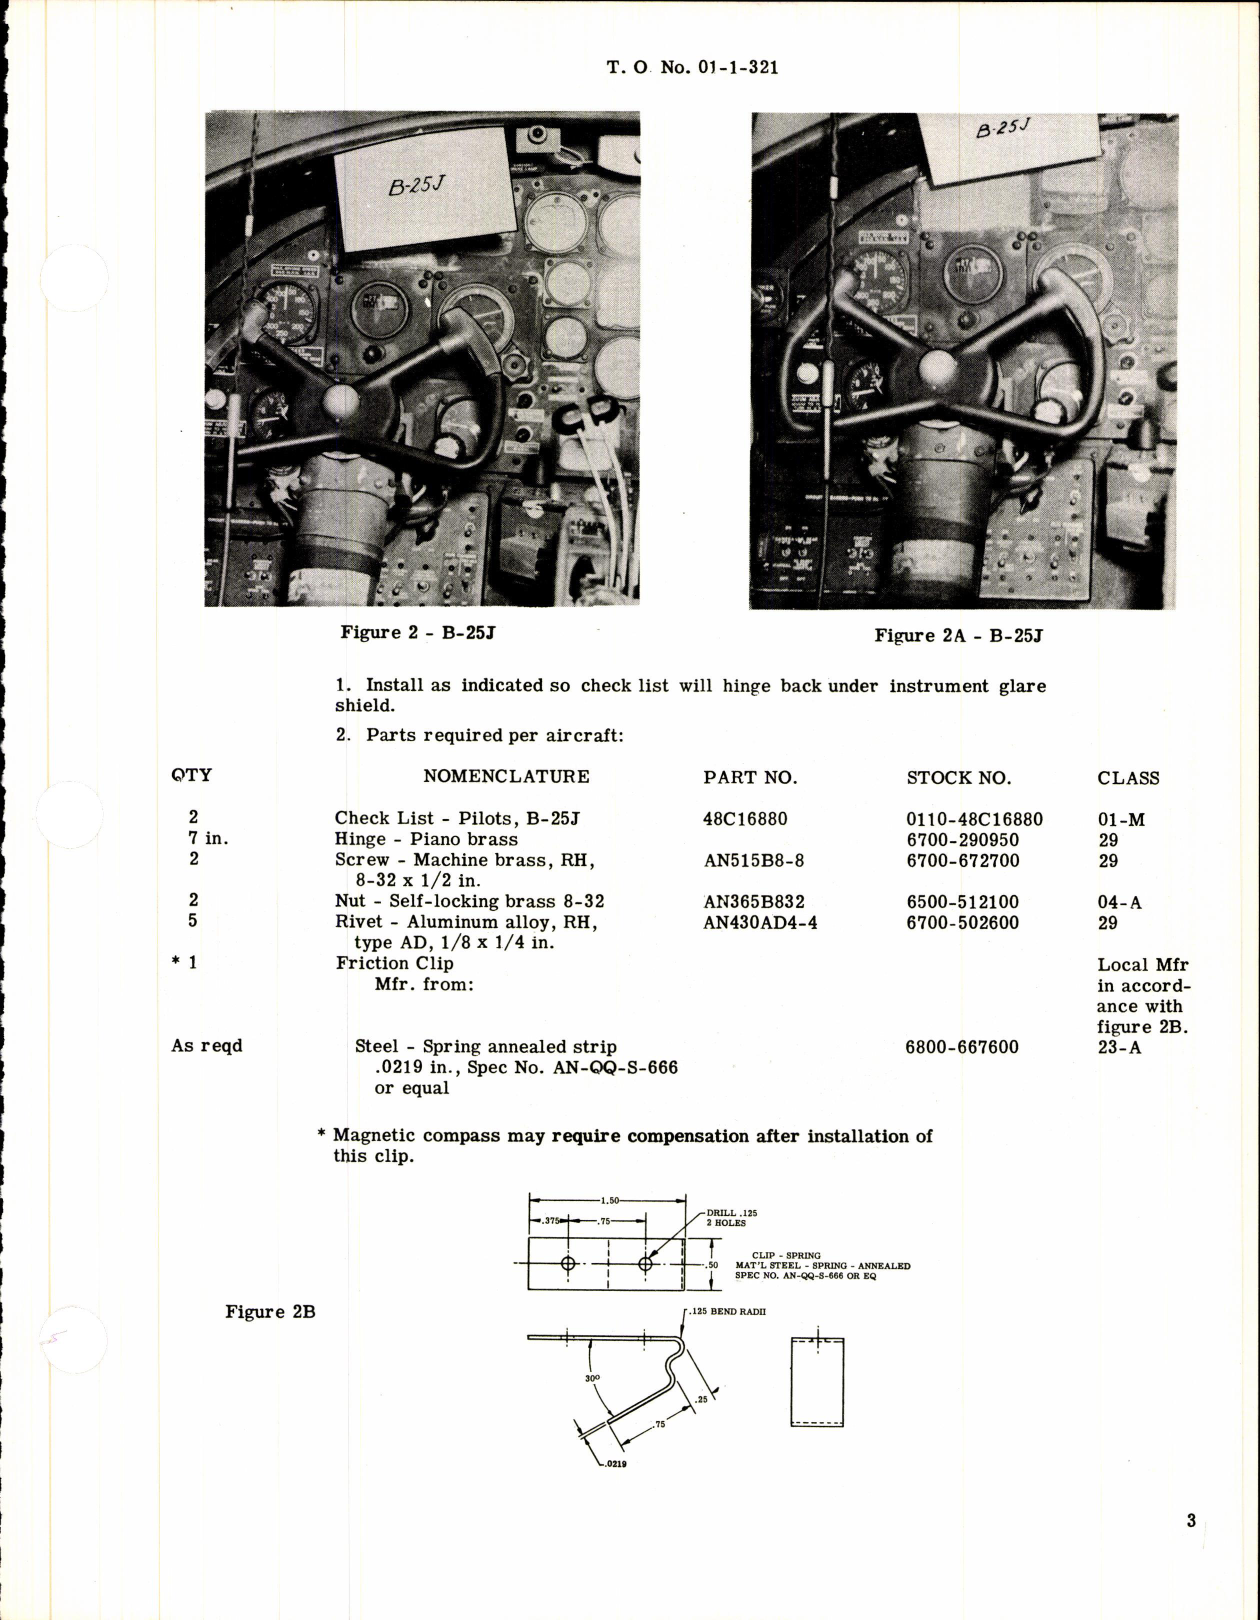 Sample page 3 from AirCorps Library document: Installation of Standard Air Crew Check Lists in Aircraft